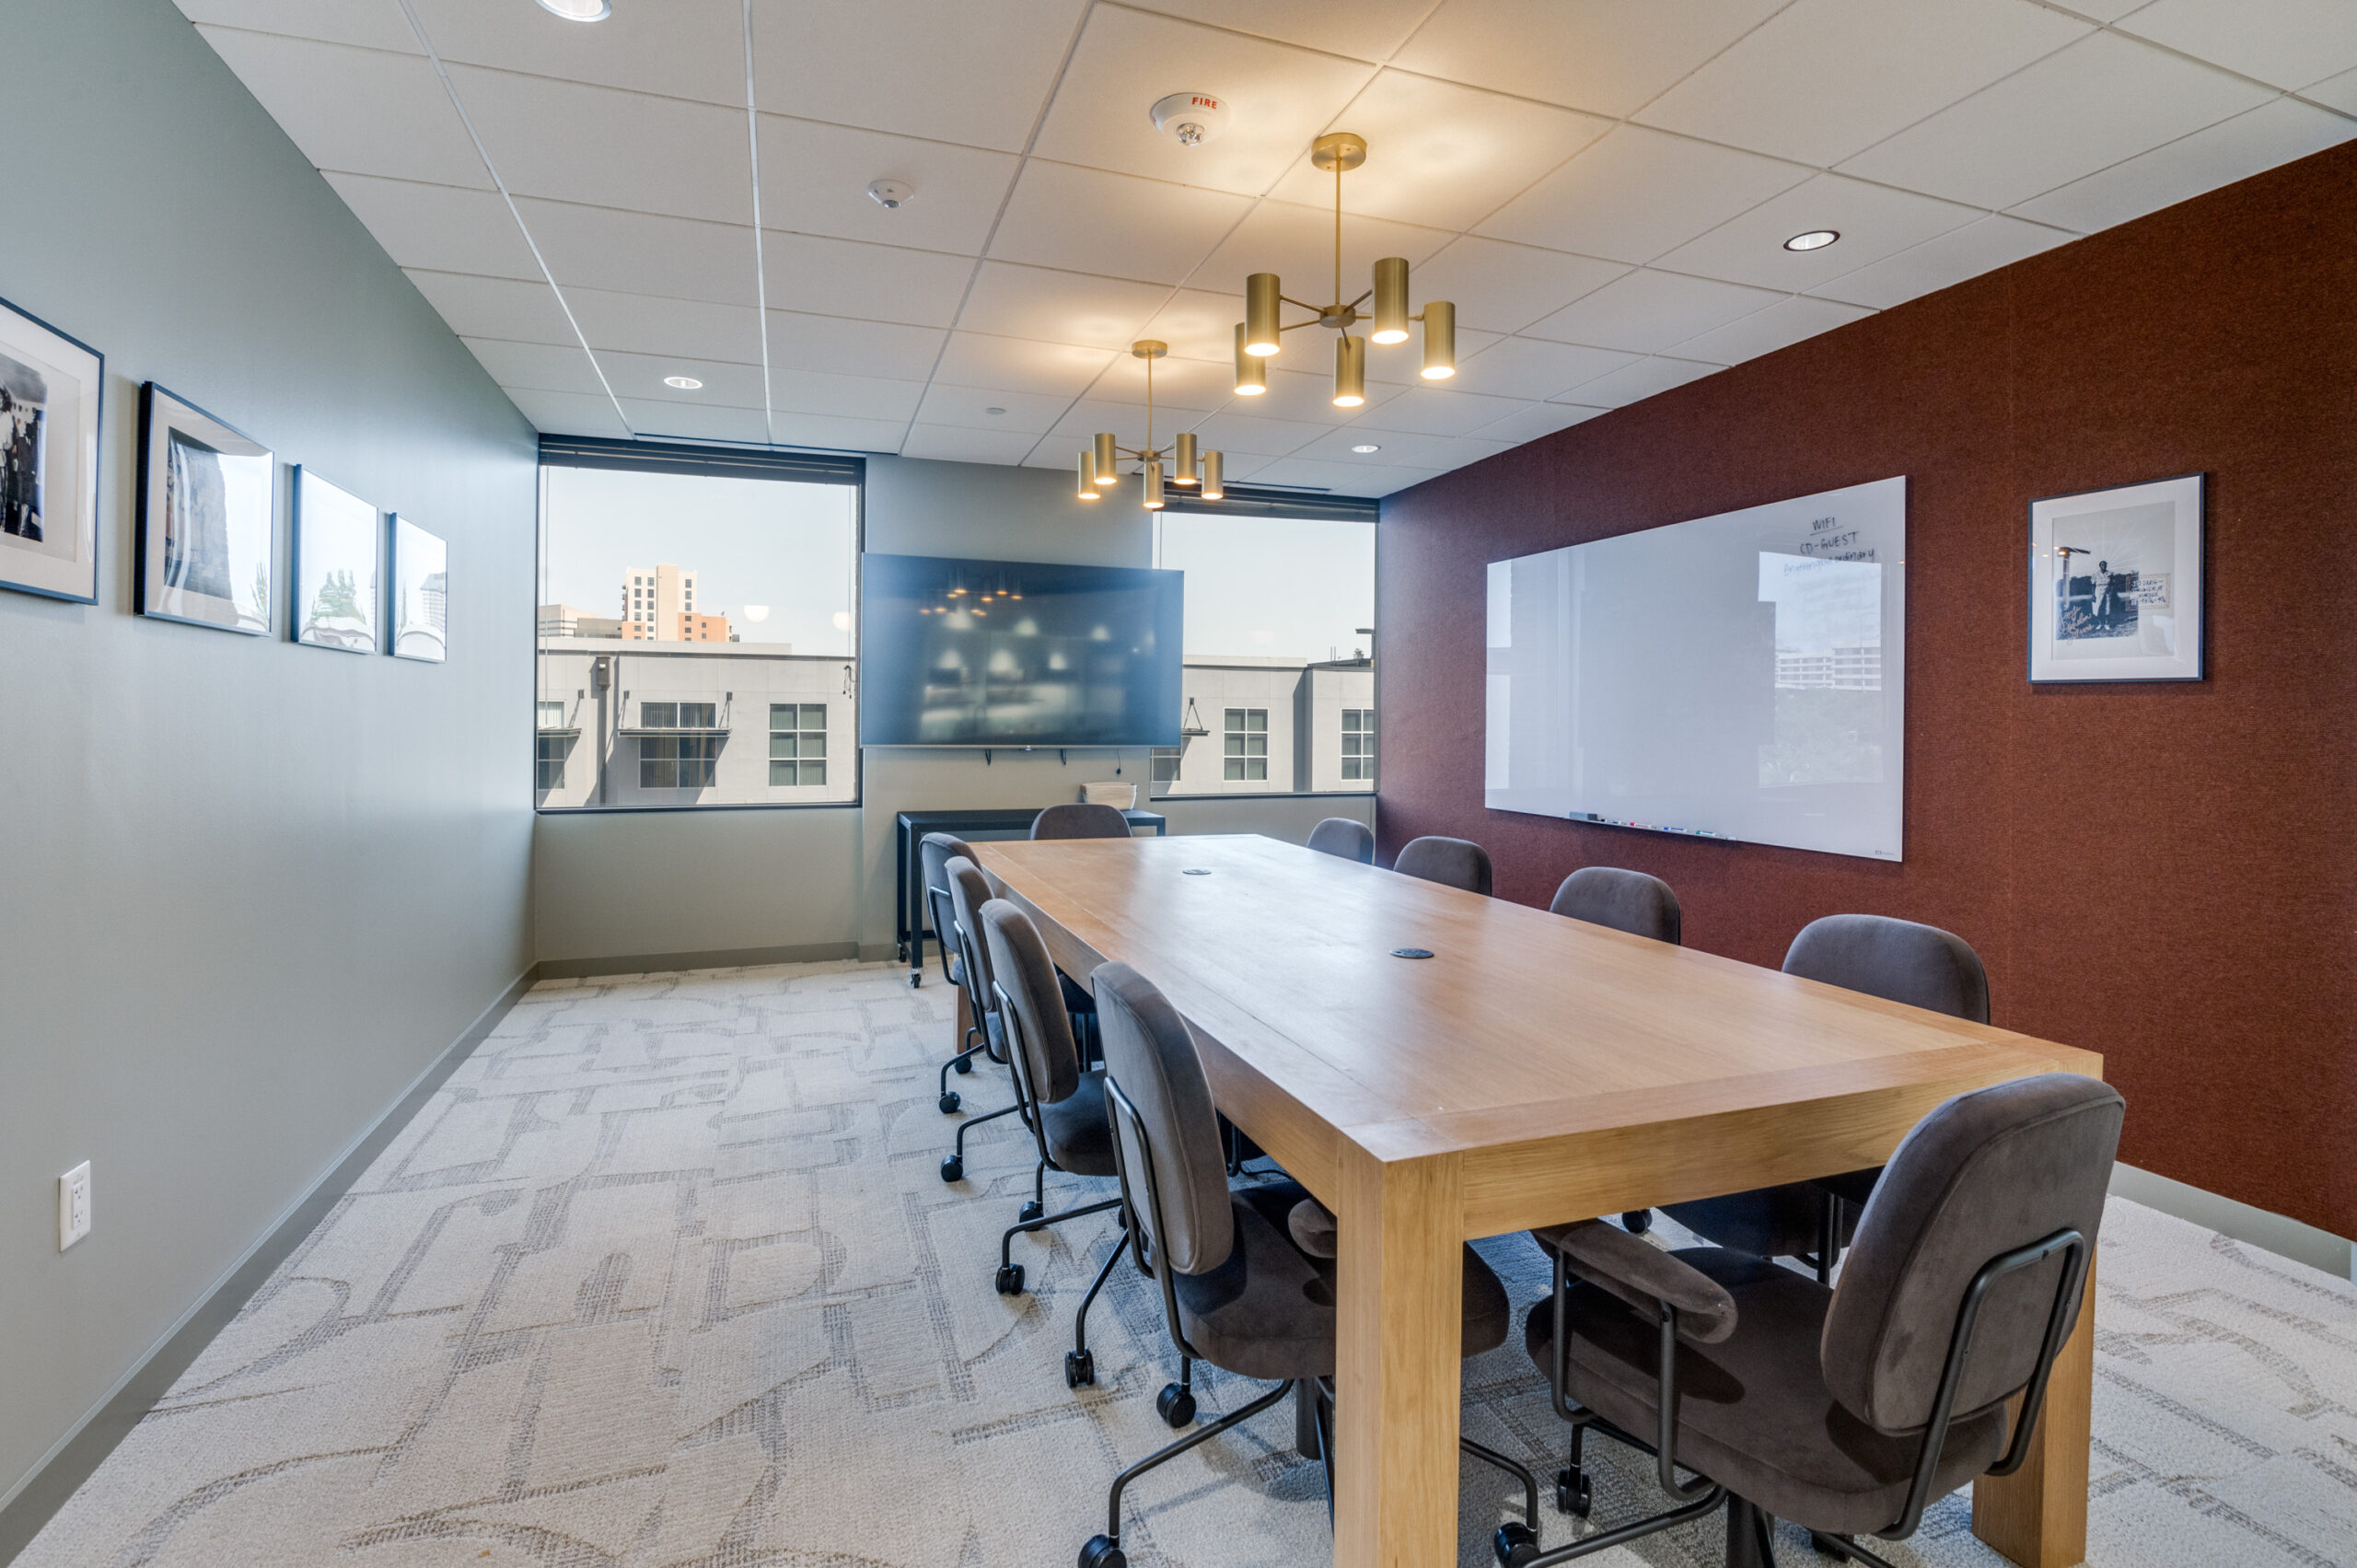 Seamless access to conference rooms